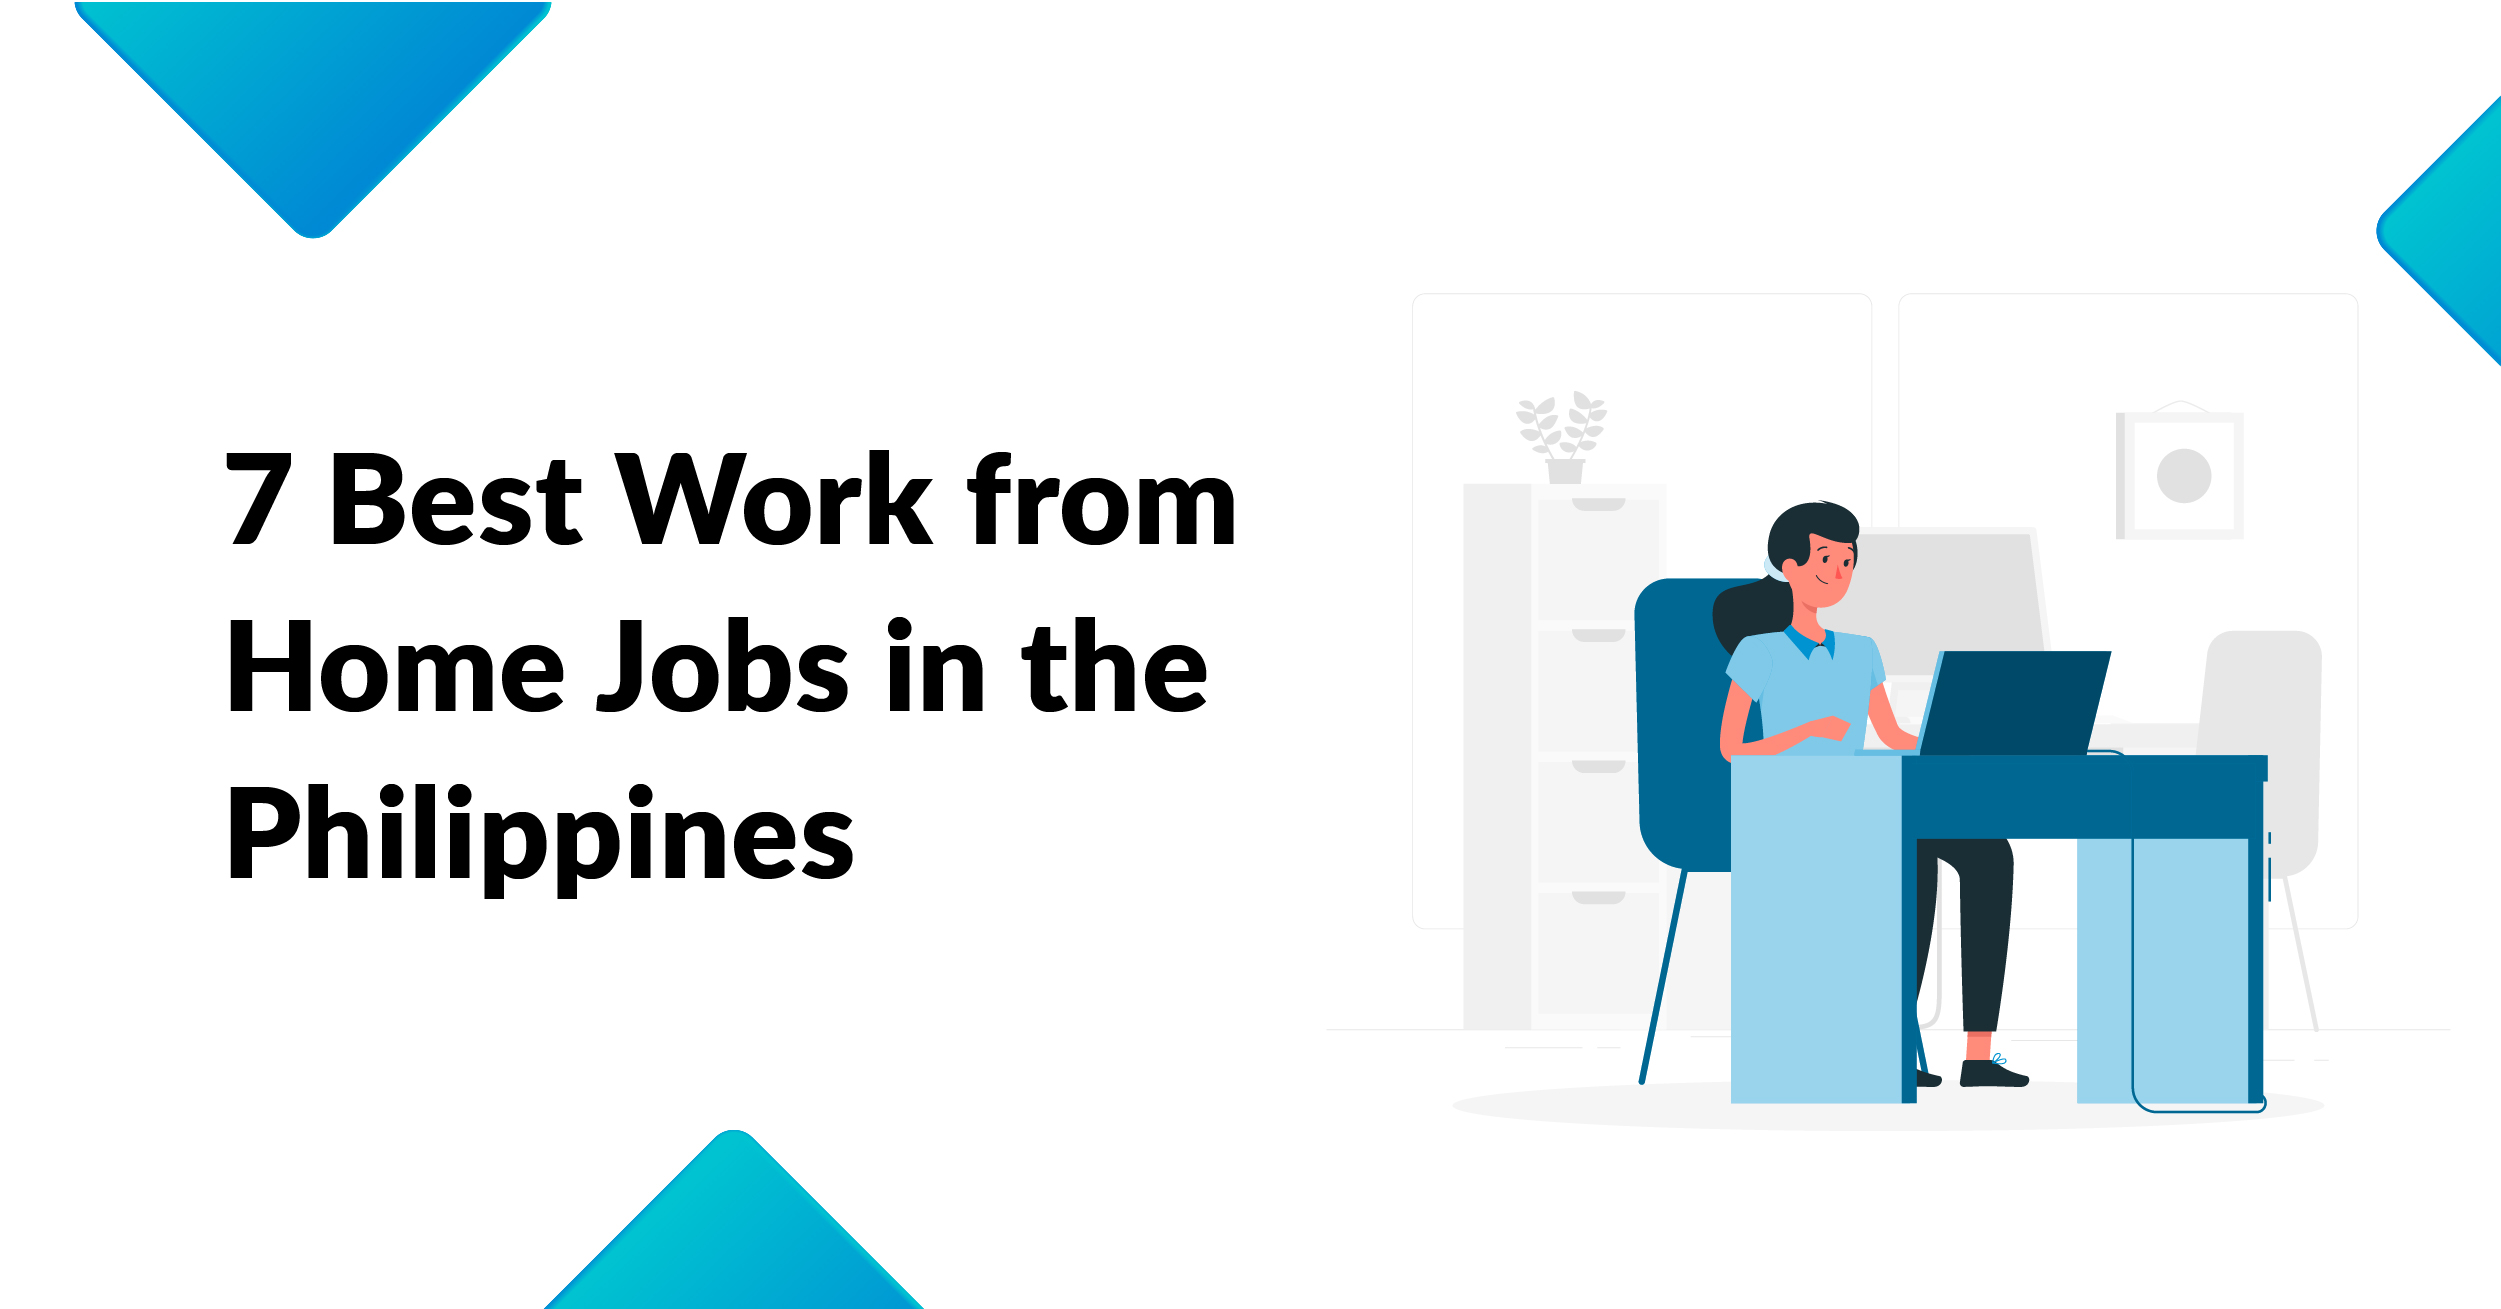 7 Best Work from Home Jobs in the Philippines